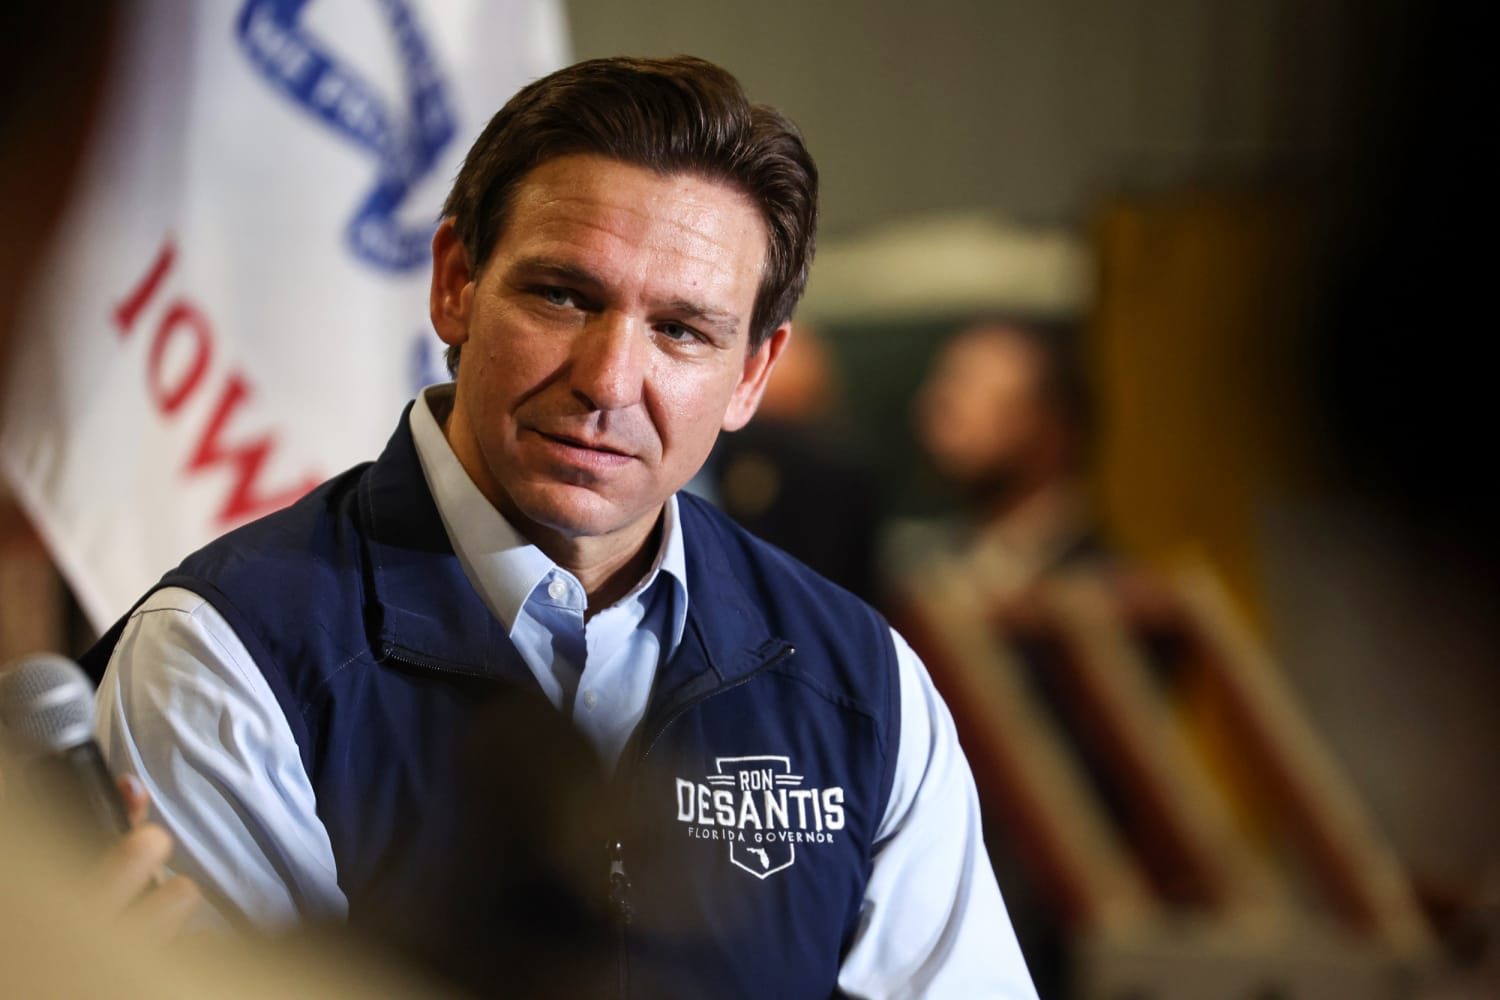 DeSantis distilled How the candidate is introducing himself to GOP voters